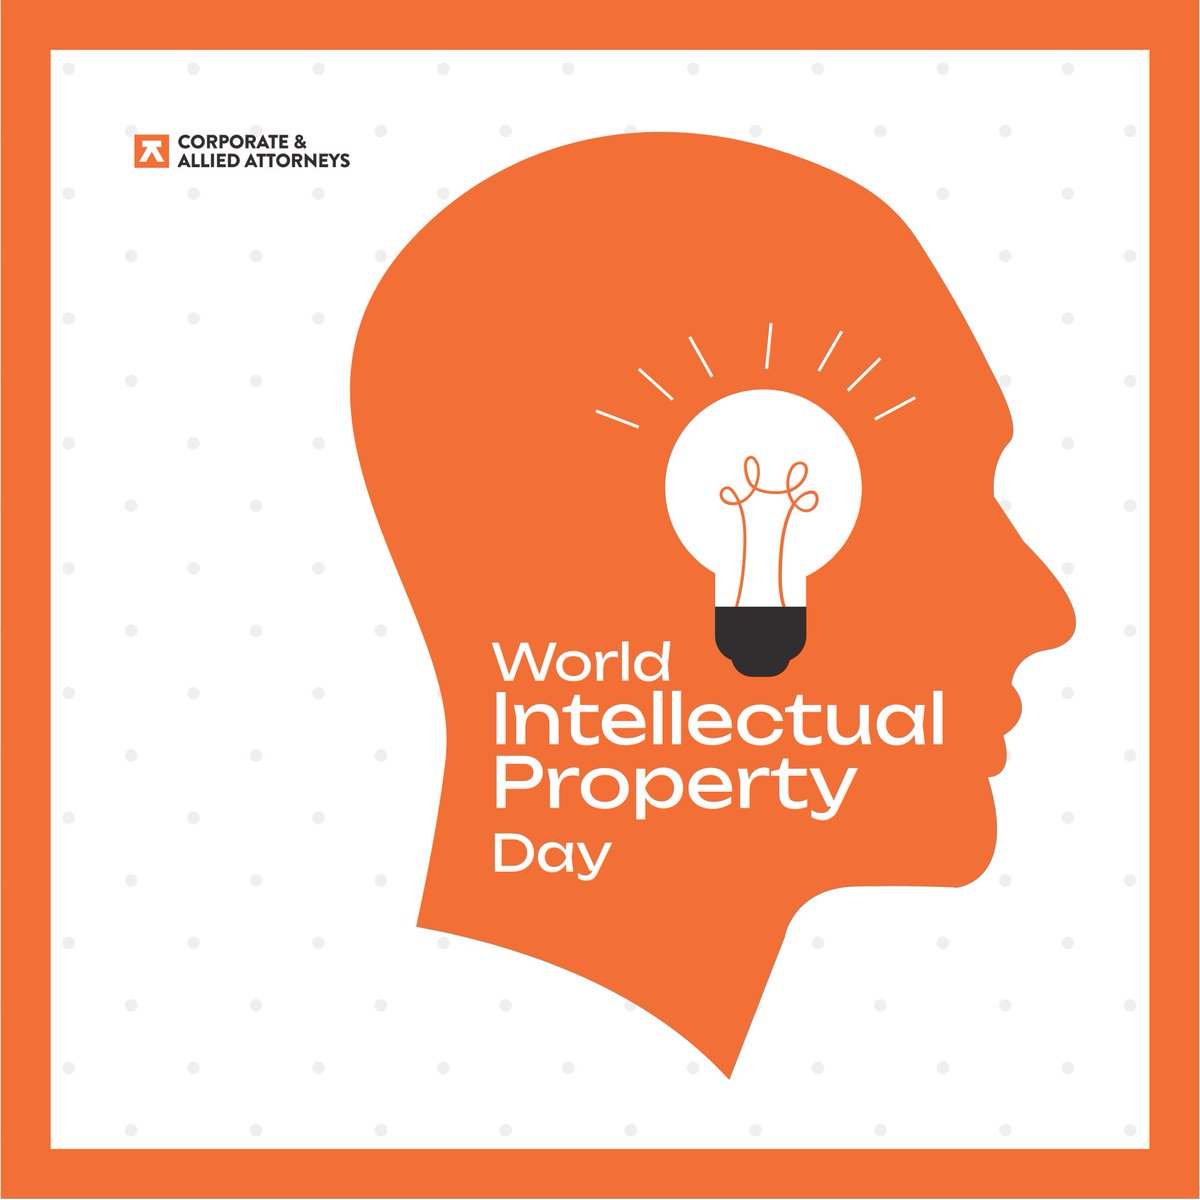 Intellectual property (IP) refers to inventions, literary and artistic works, designs, names, and images used in commerce

On World Intellectual Property Day, we celebrate the importance of IP laws in encouraging innovation and creativity.

#WorldIntellectualPropertyDay #lawyers